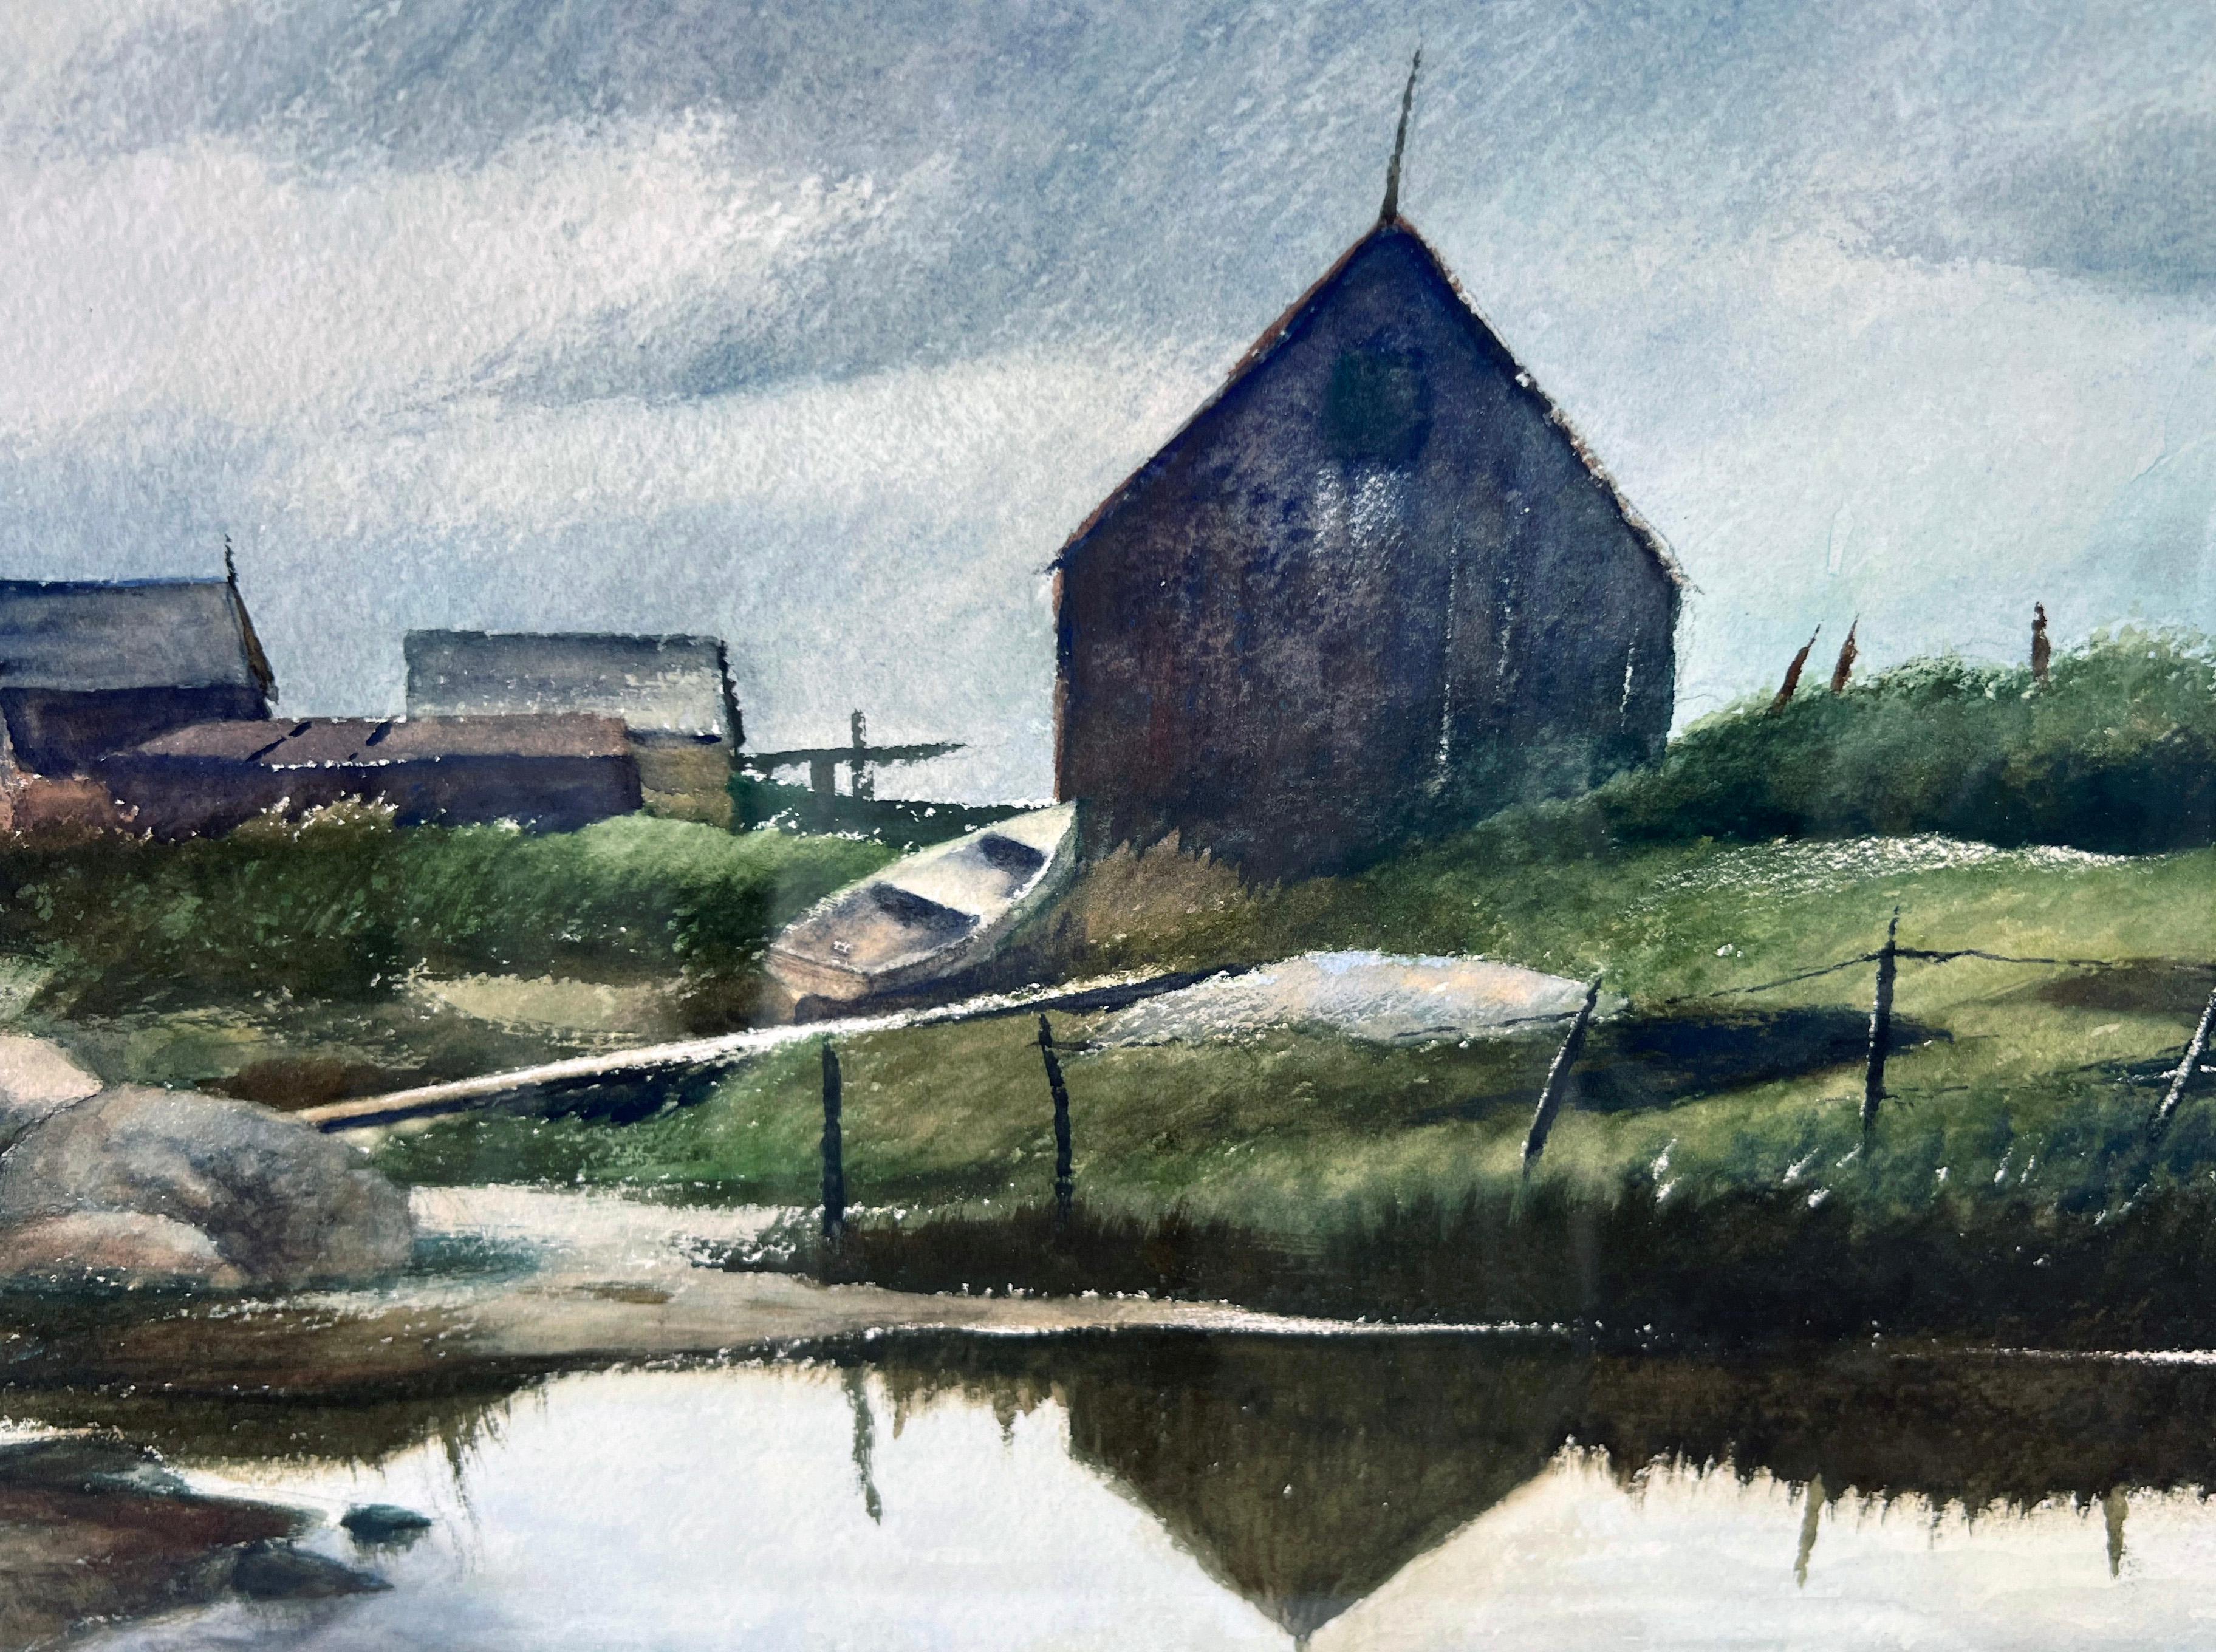 Fishing Village - Massachusetts Watercolor on Paper
Cloudy day on the Massachusetts Coast by Richard Clark Hare (American, 1906-1959).  Richard Clarke Hare was a painter best known for his watercolor scenes of the Massachusetts seashore.  In the